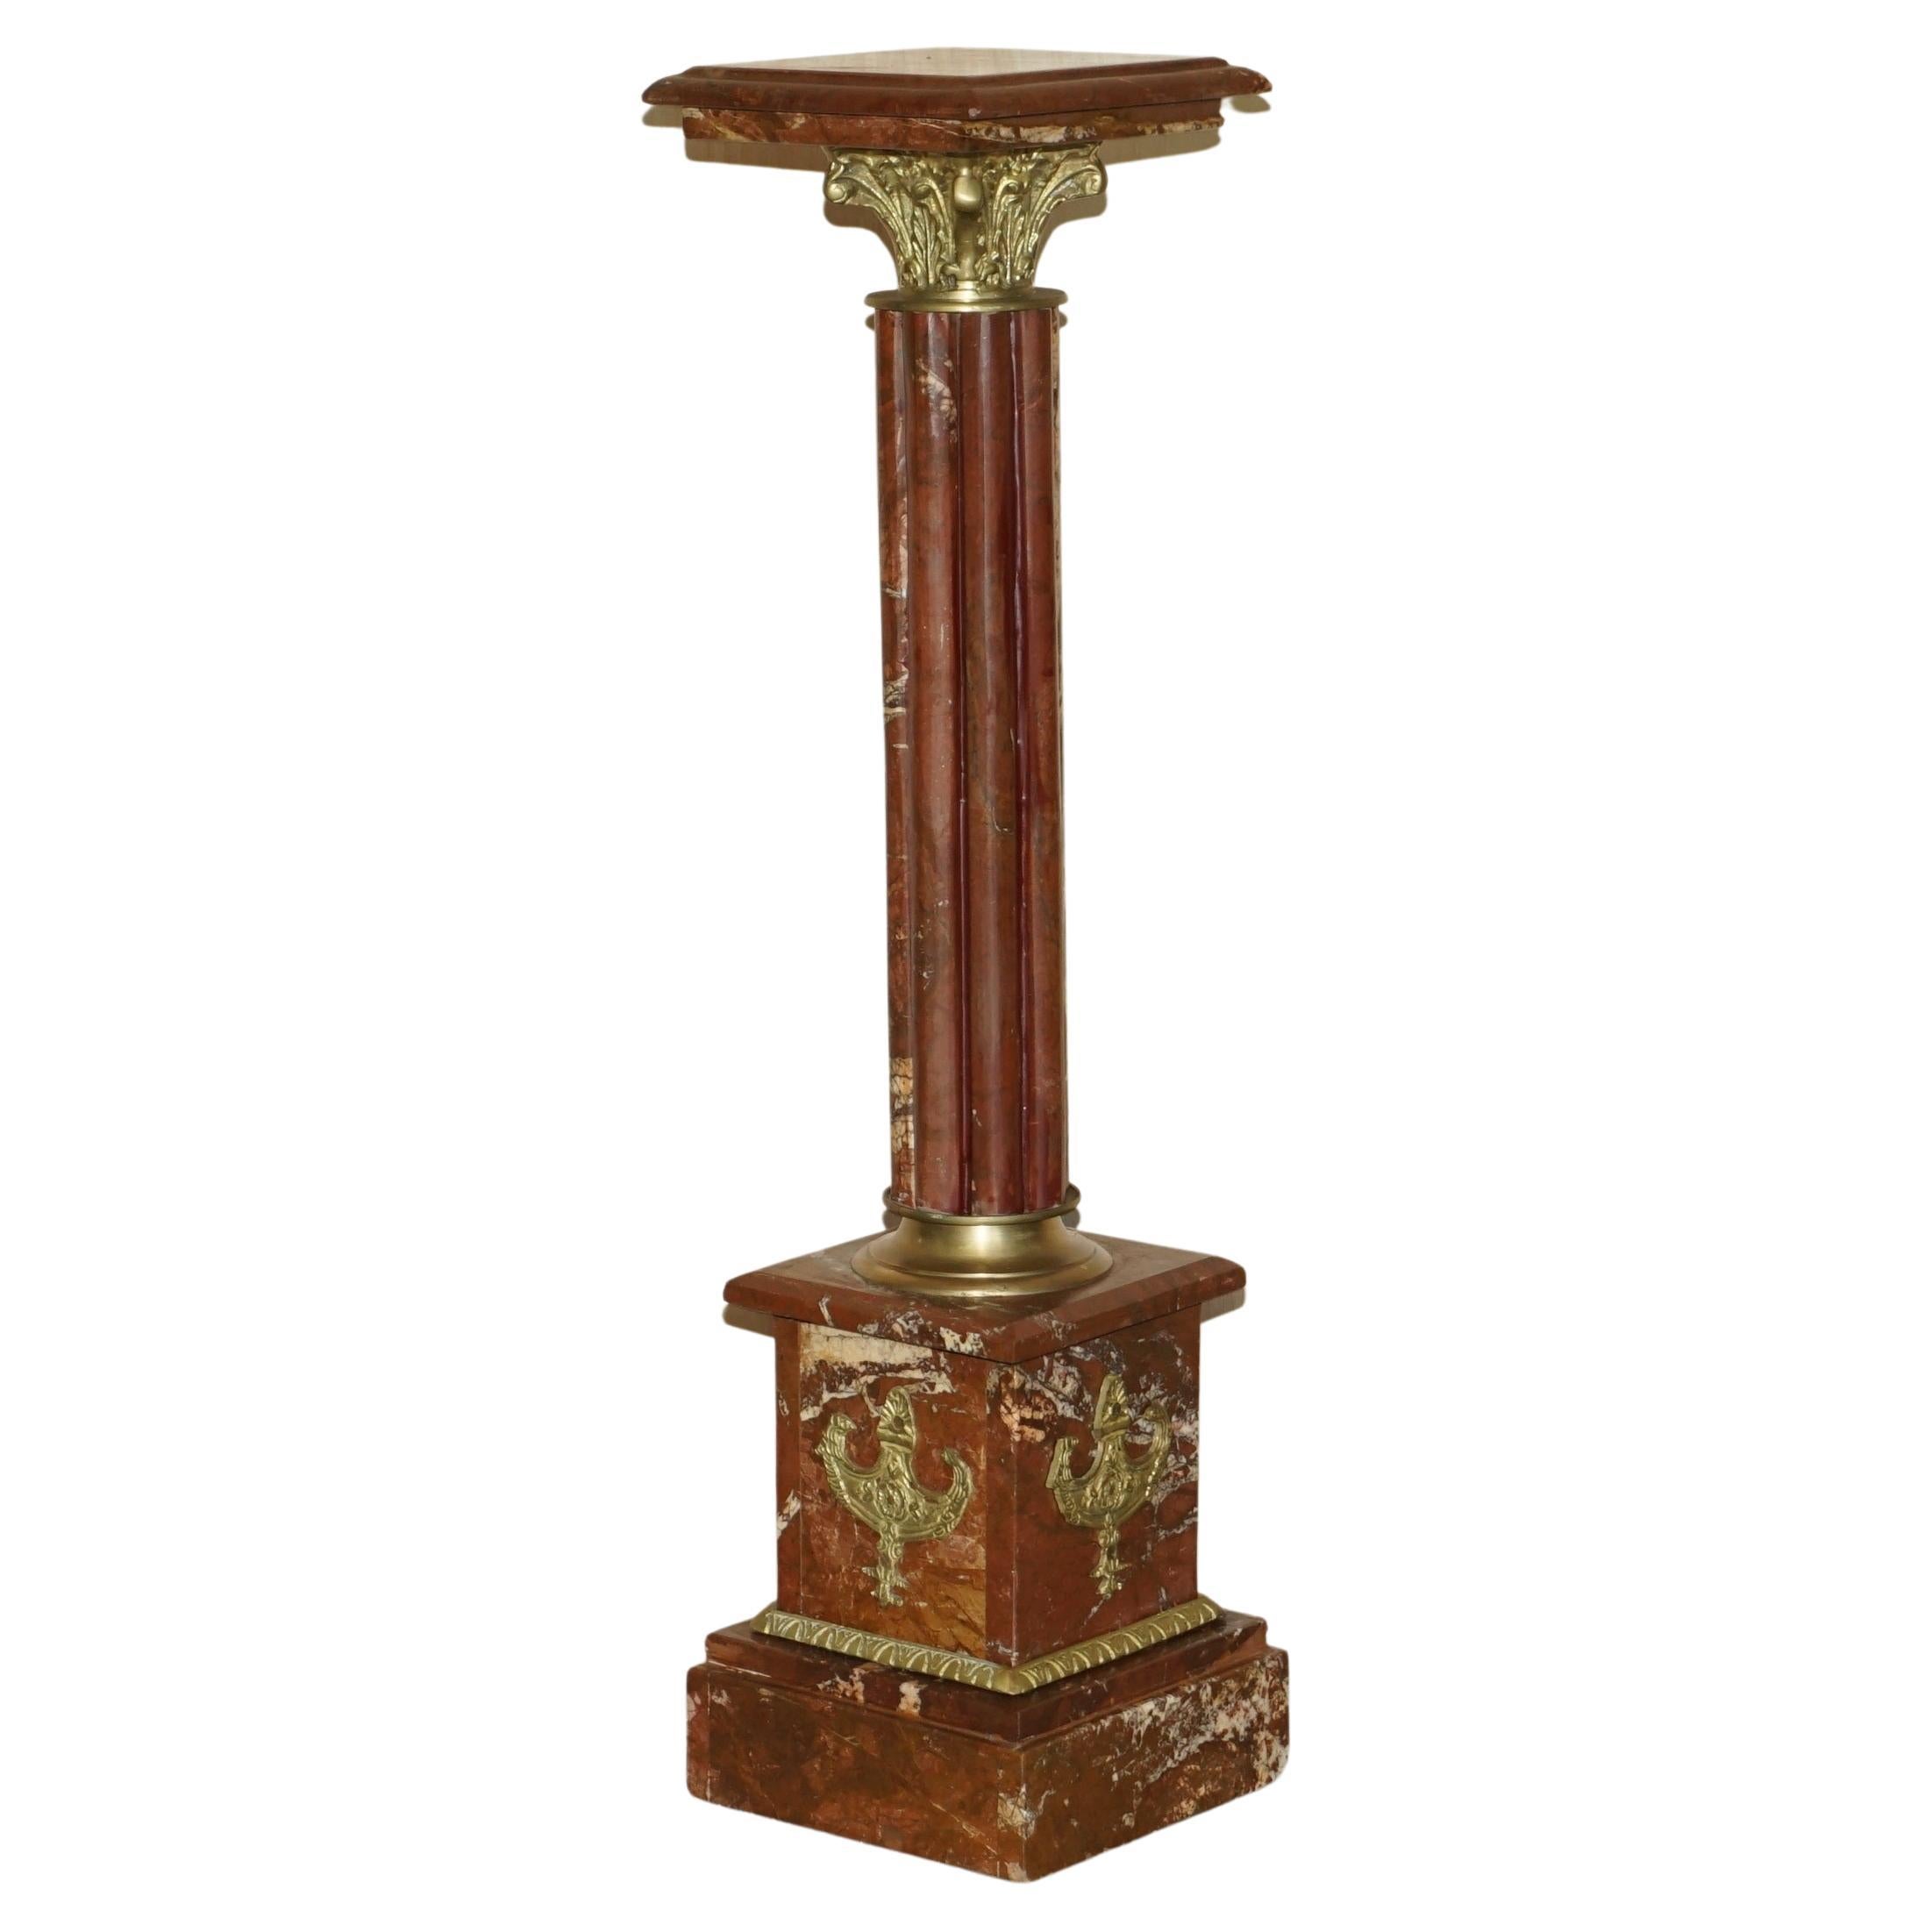 Antique French Empire Solid Marble with Brass Accents Corinthian Pillar Stand For Sale